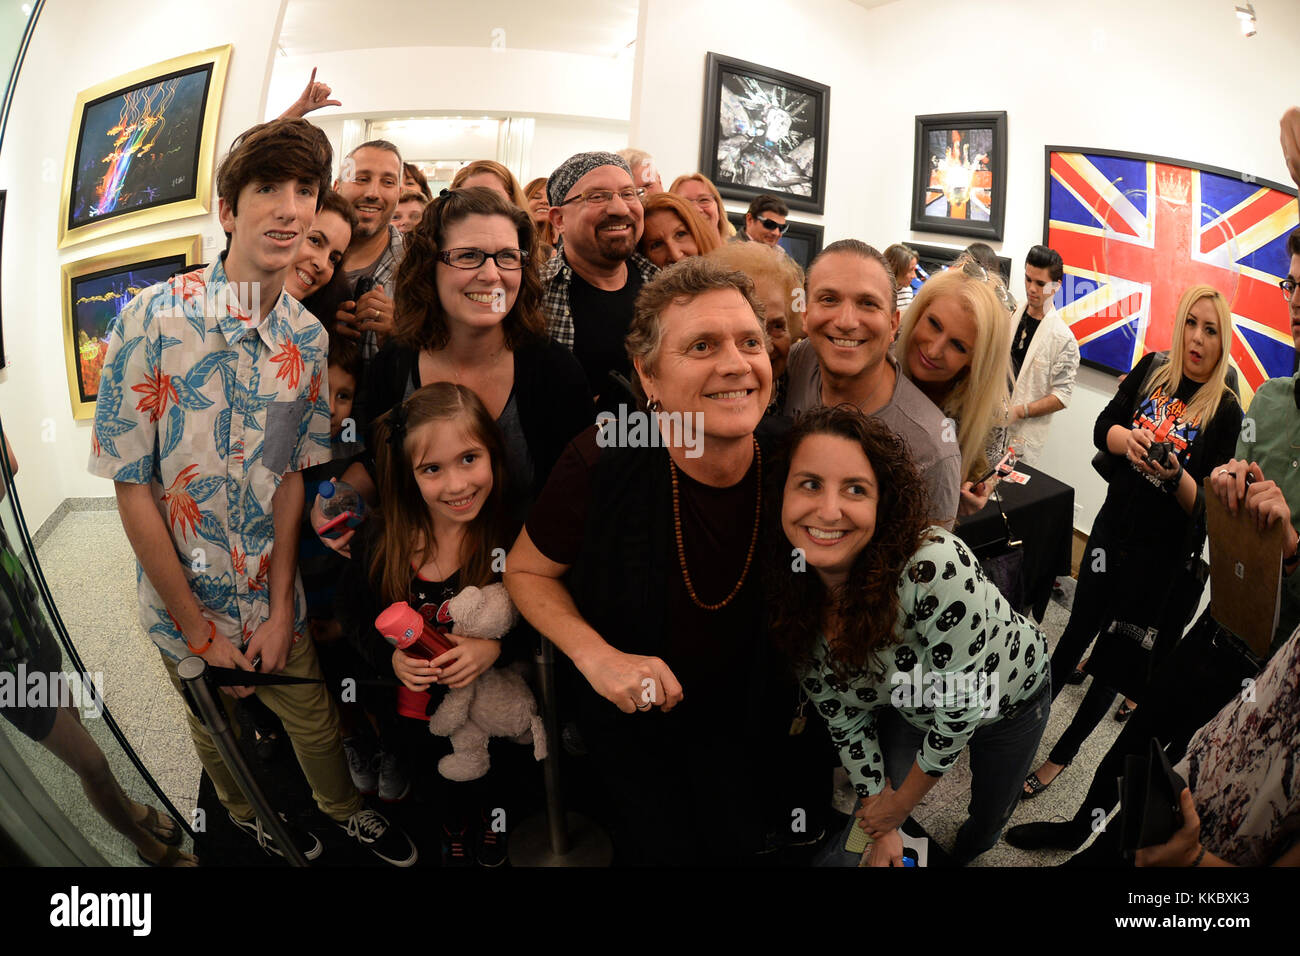 FORT LAUDERDALE, FL - JANUARY 16: Rick Allen of Def Leppard showcases his artwork at Wentworth Gallery on January 16, 2016 in Fort Lauderdale, Florida  People:  Rick Allen Stock Photo